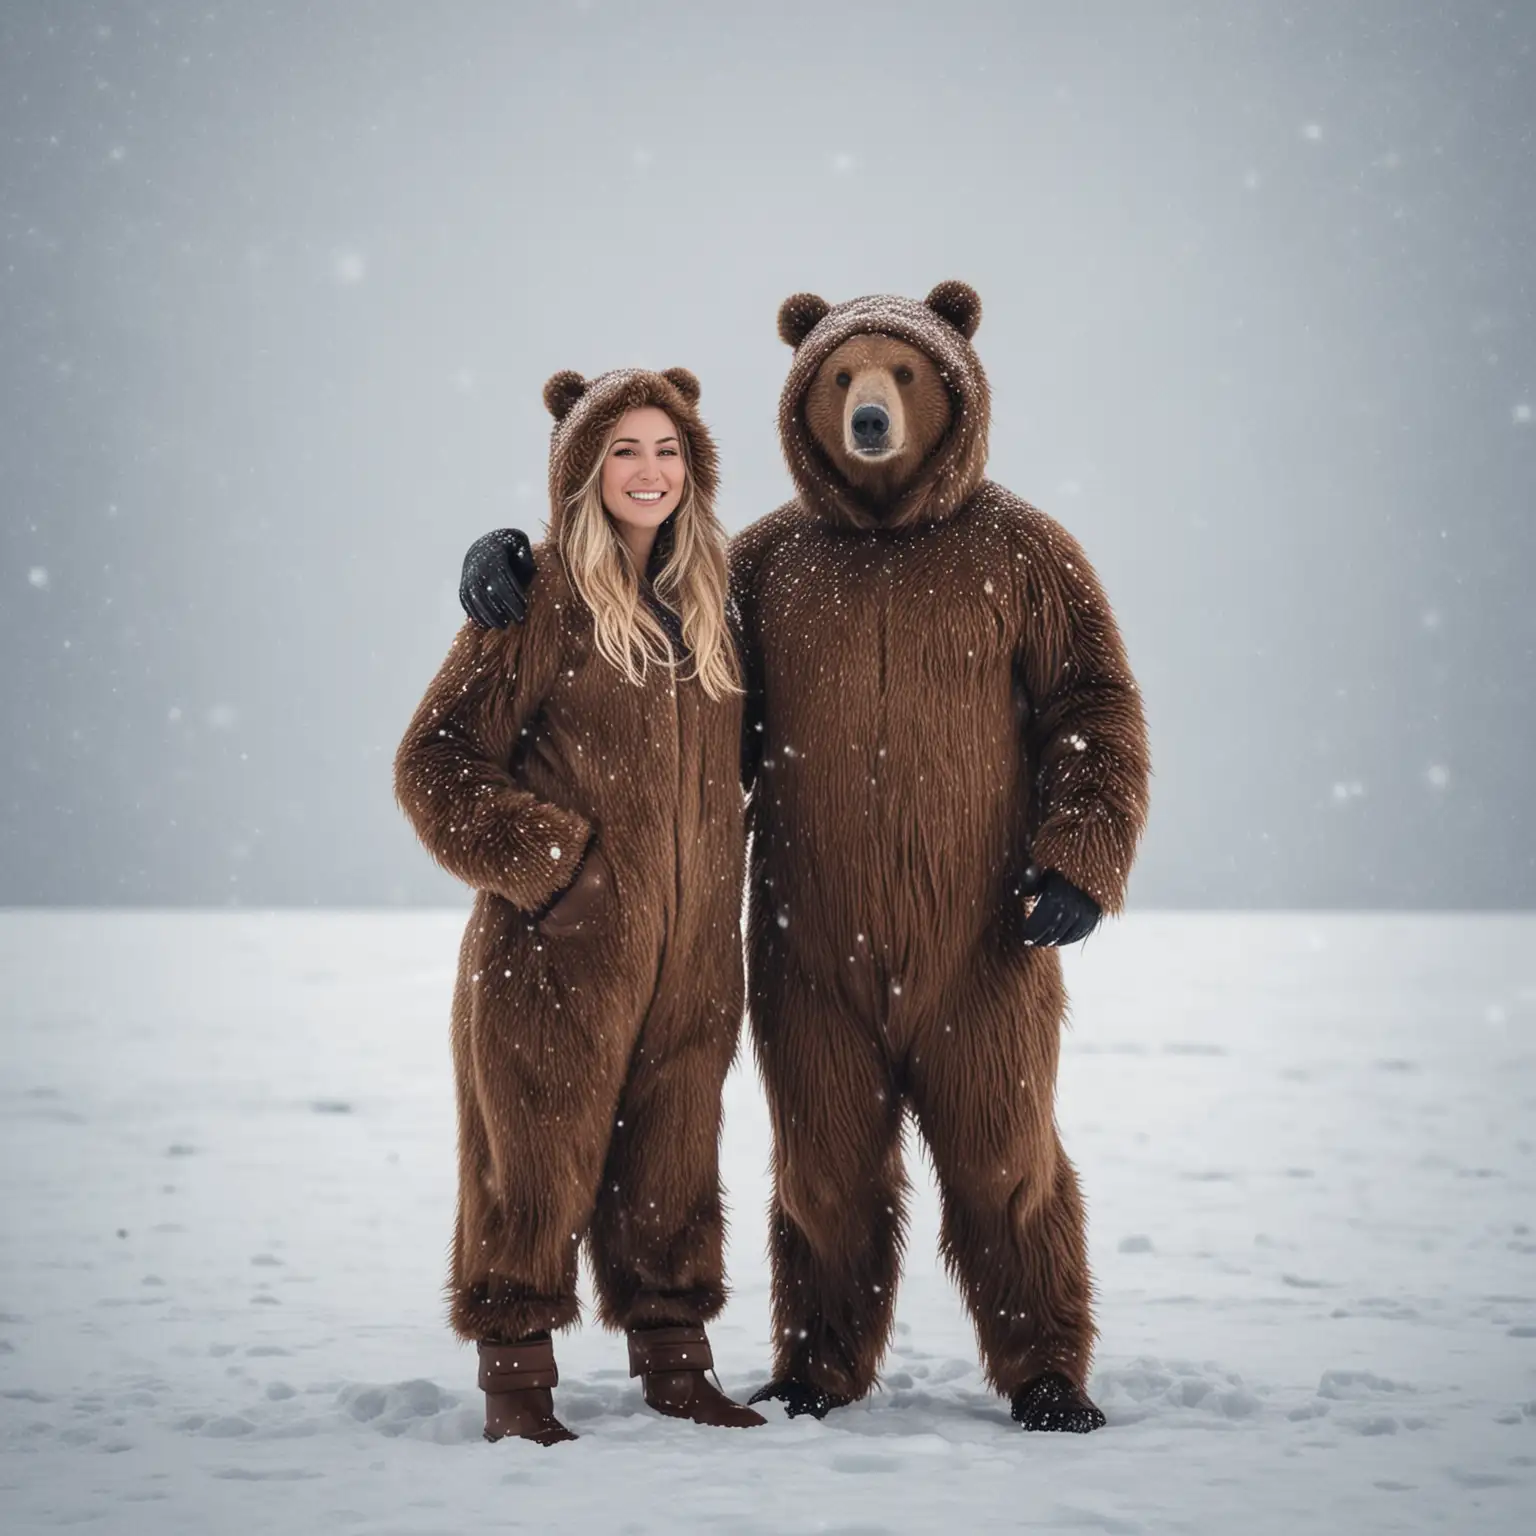 Affectionate Couple Embracing in Bear Costumes Amidst Arctic Snowstorm